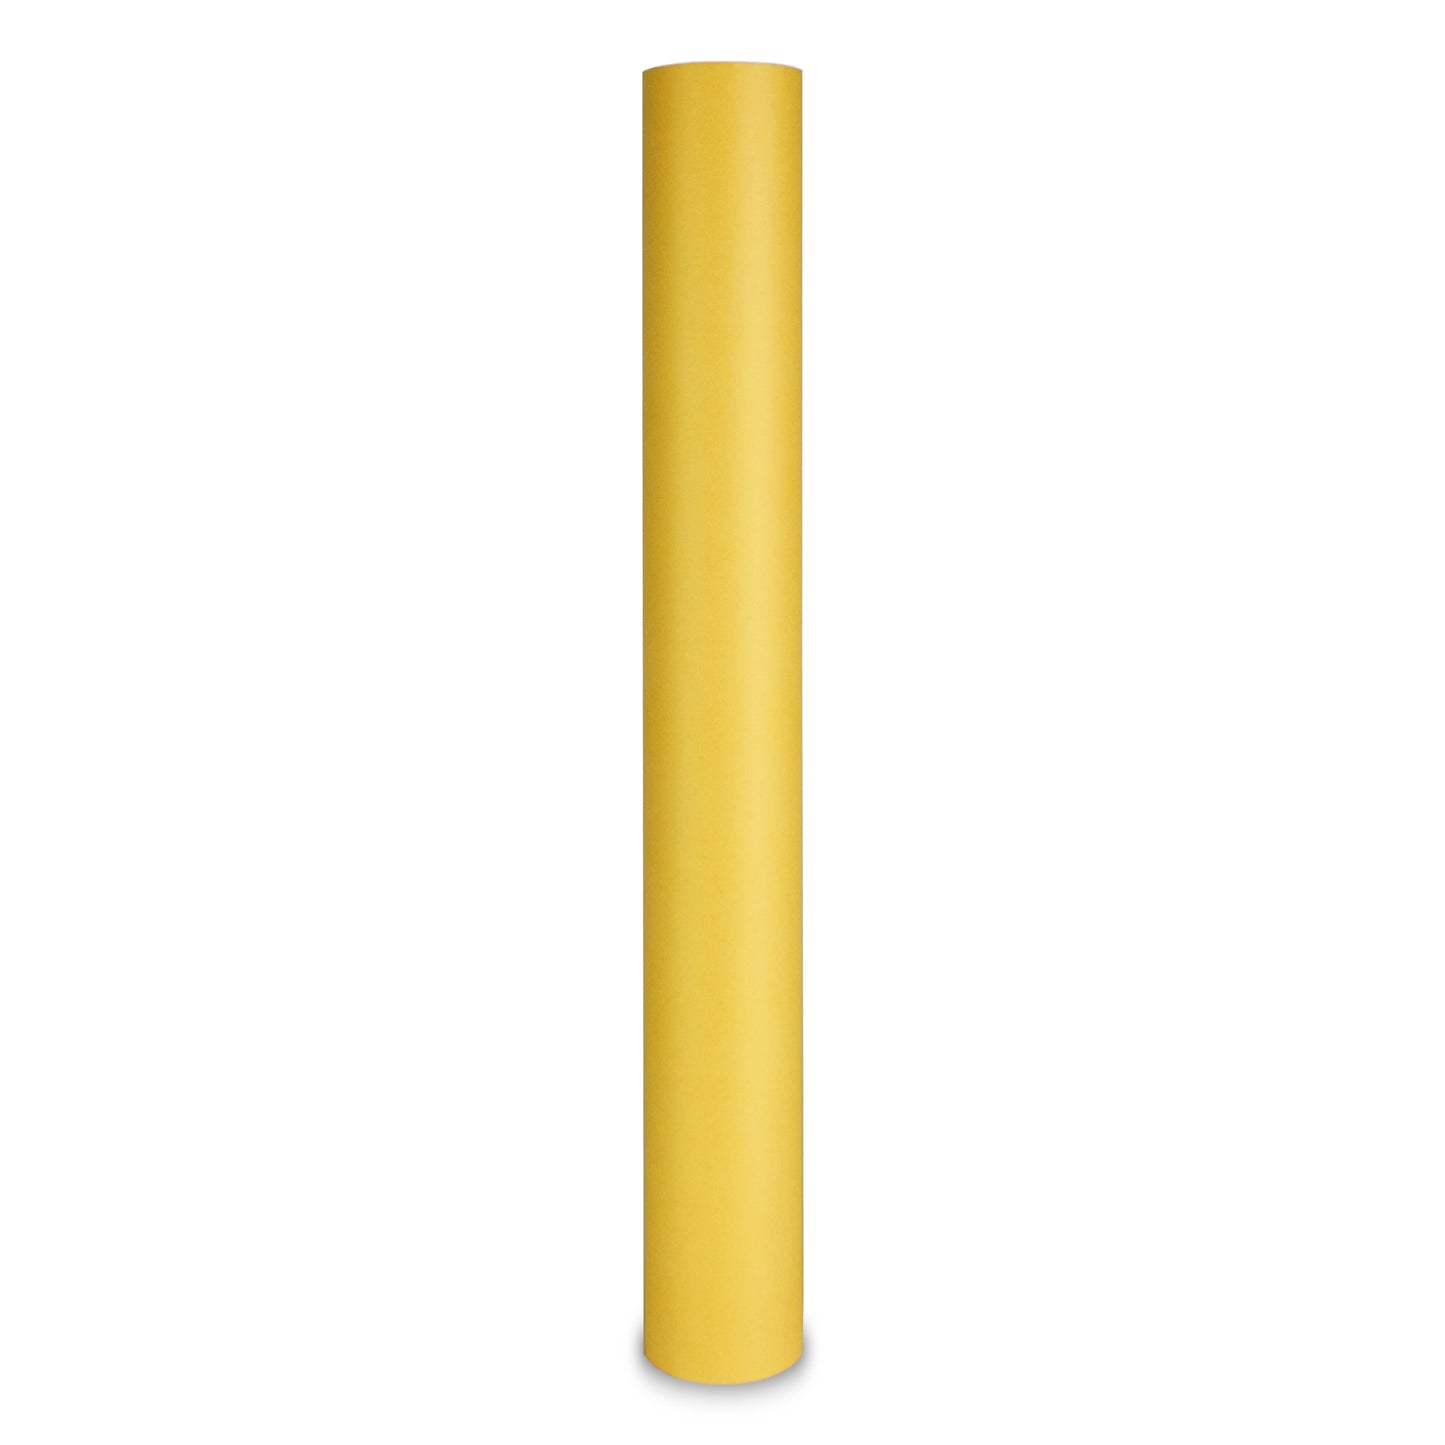 Tracing Paper Rolls 50 yards Yellow